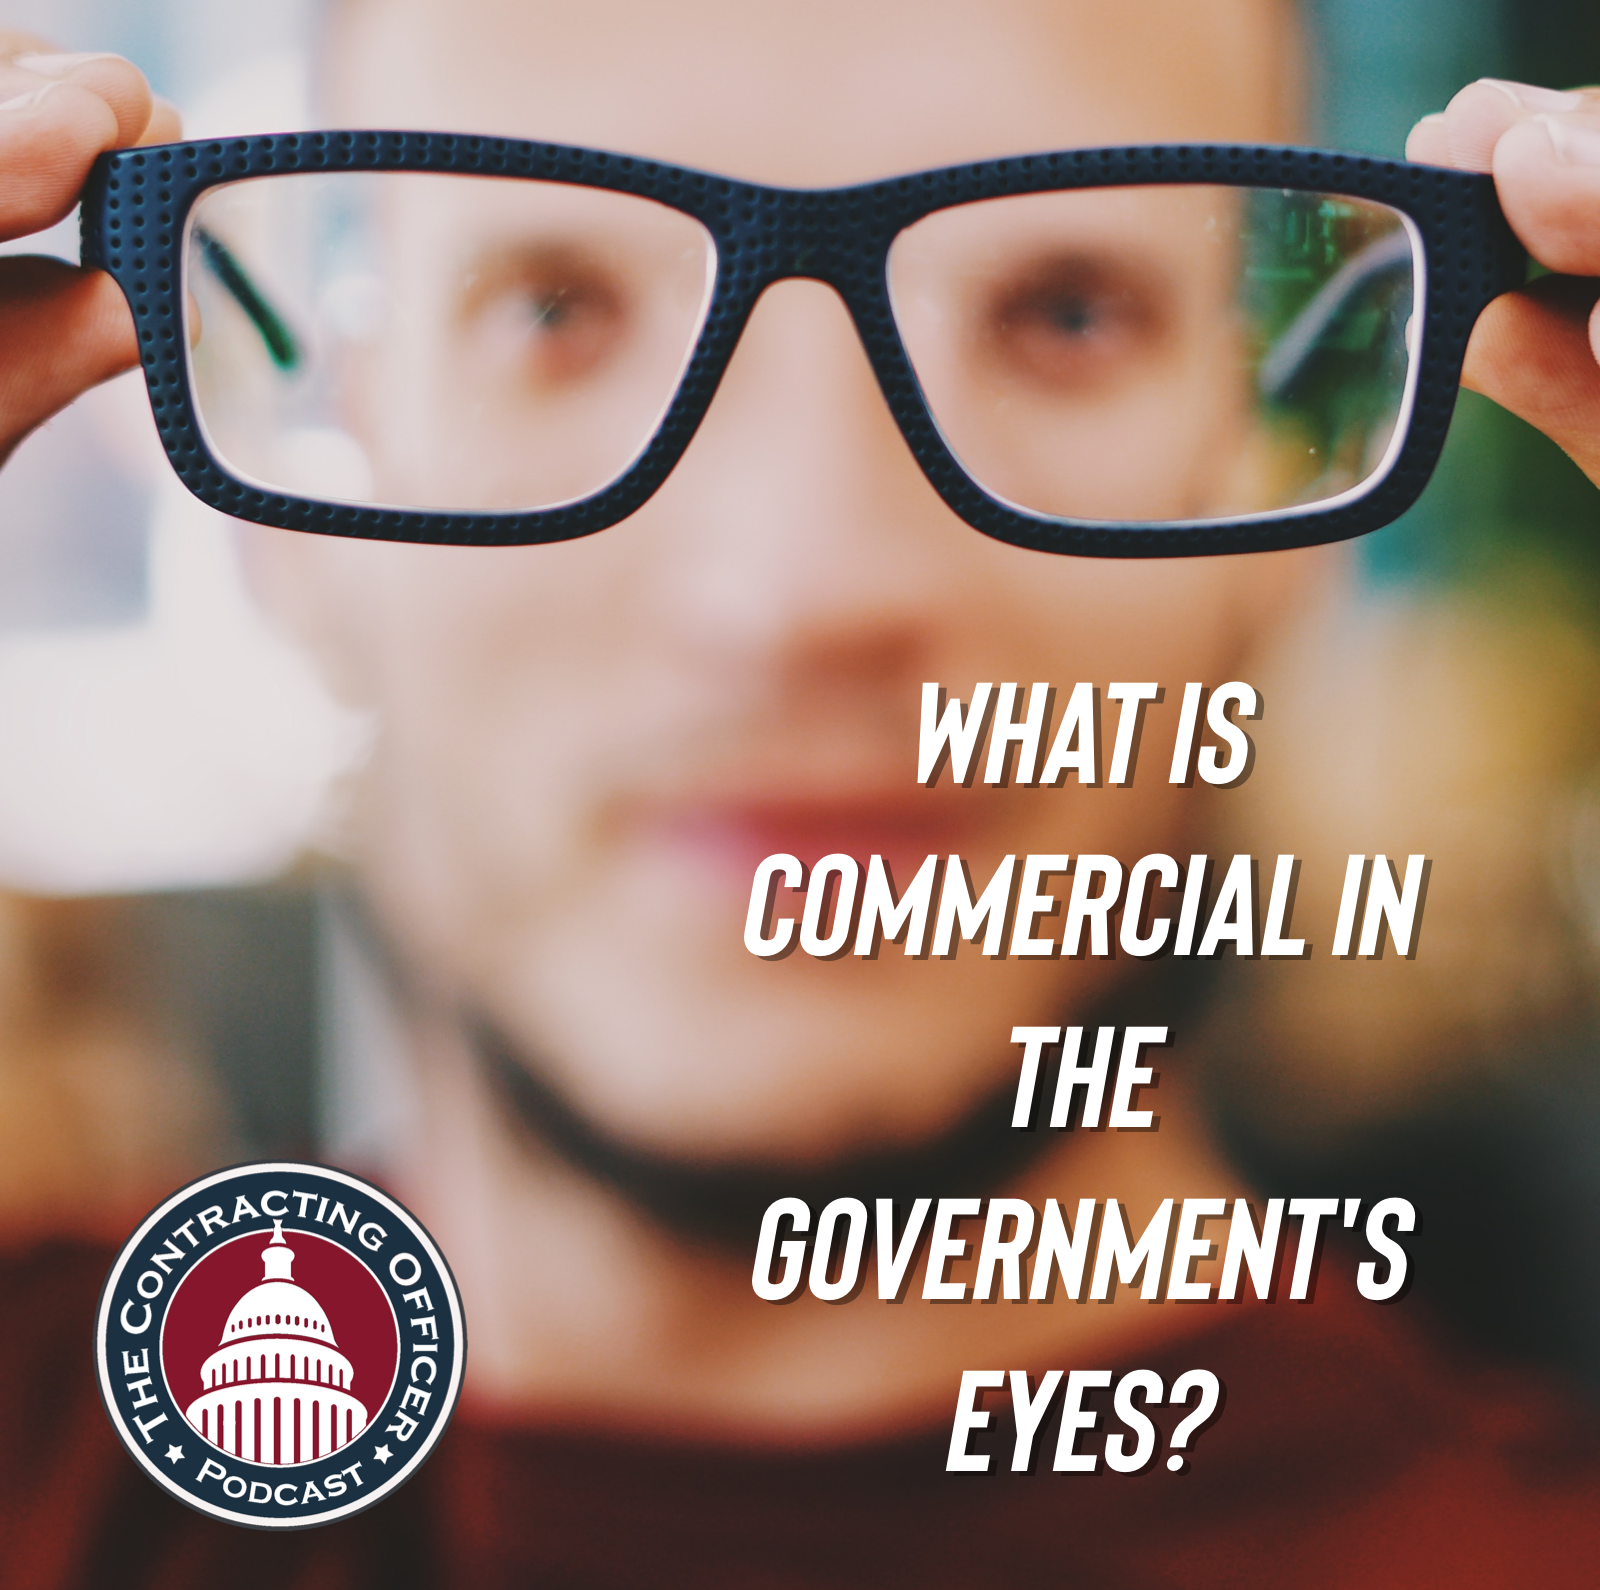 386 – What is commercial in the government’s eyes?